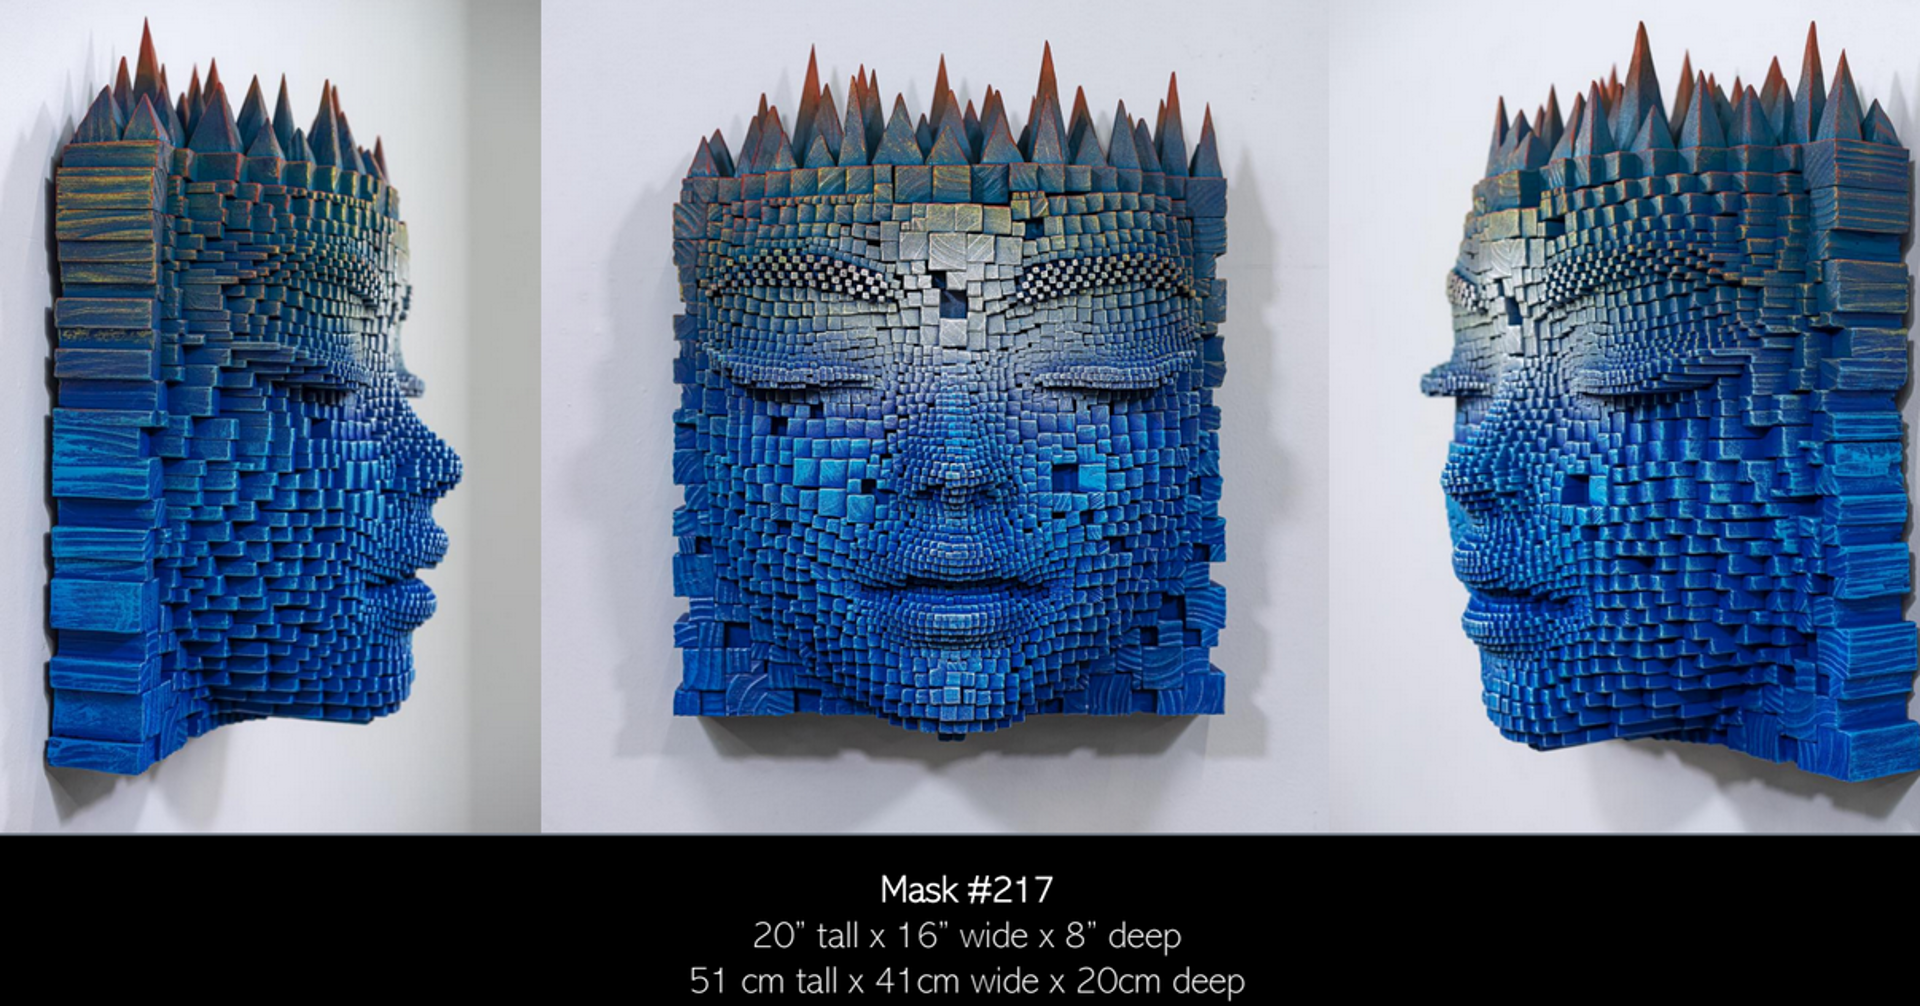 Mask 217 by Gil Bruvel